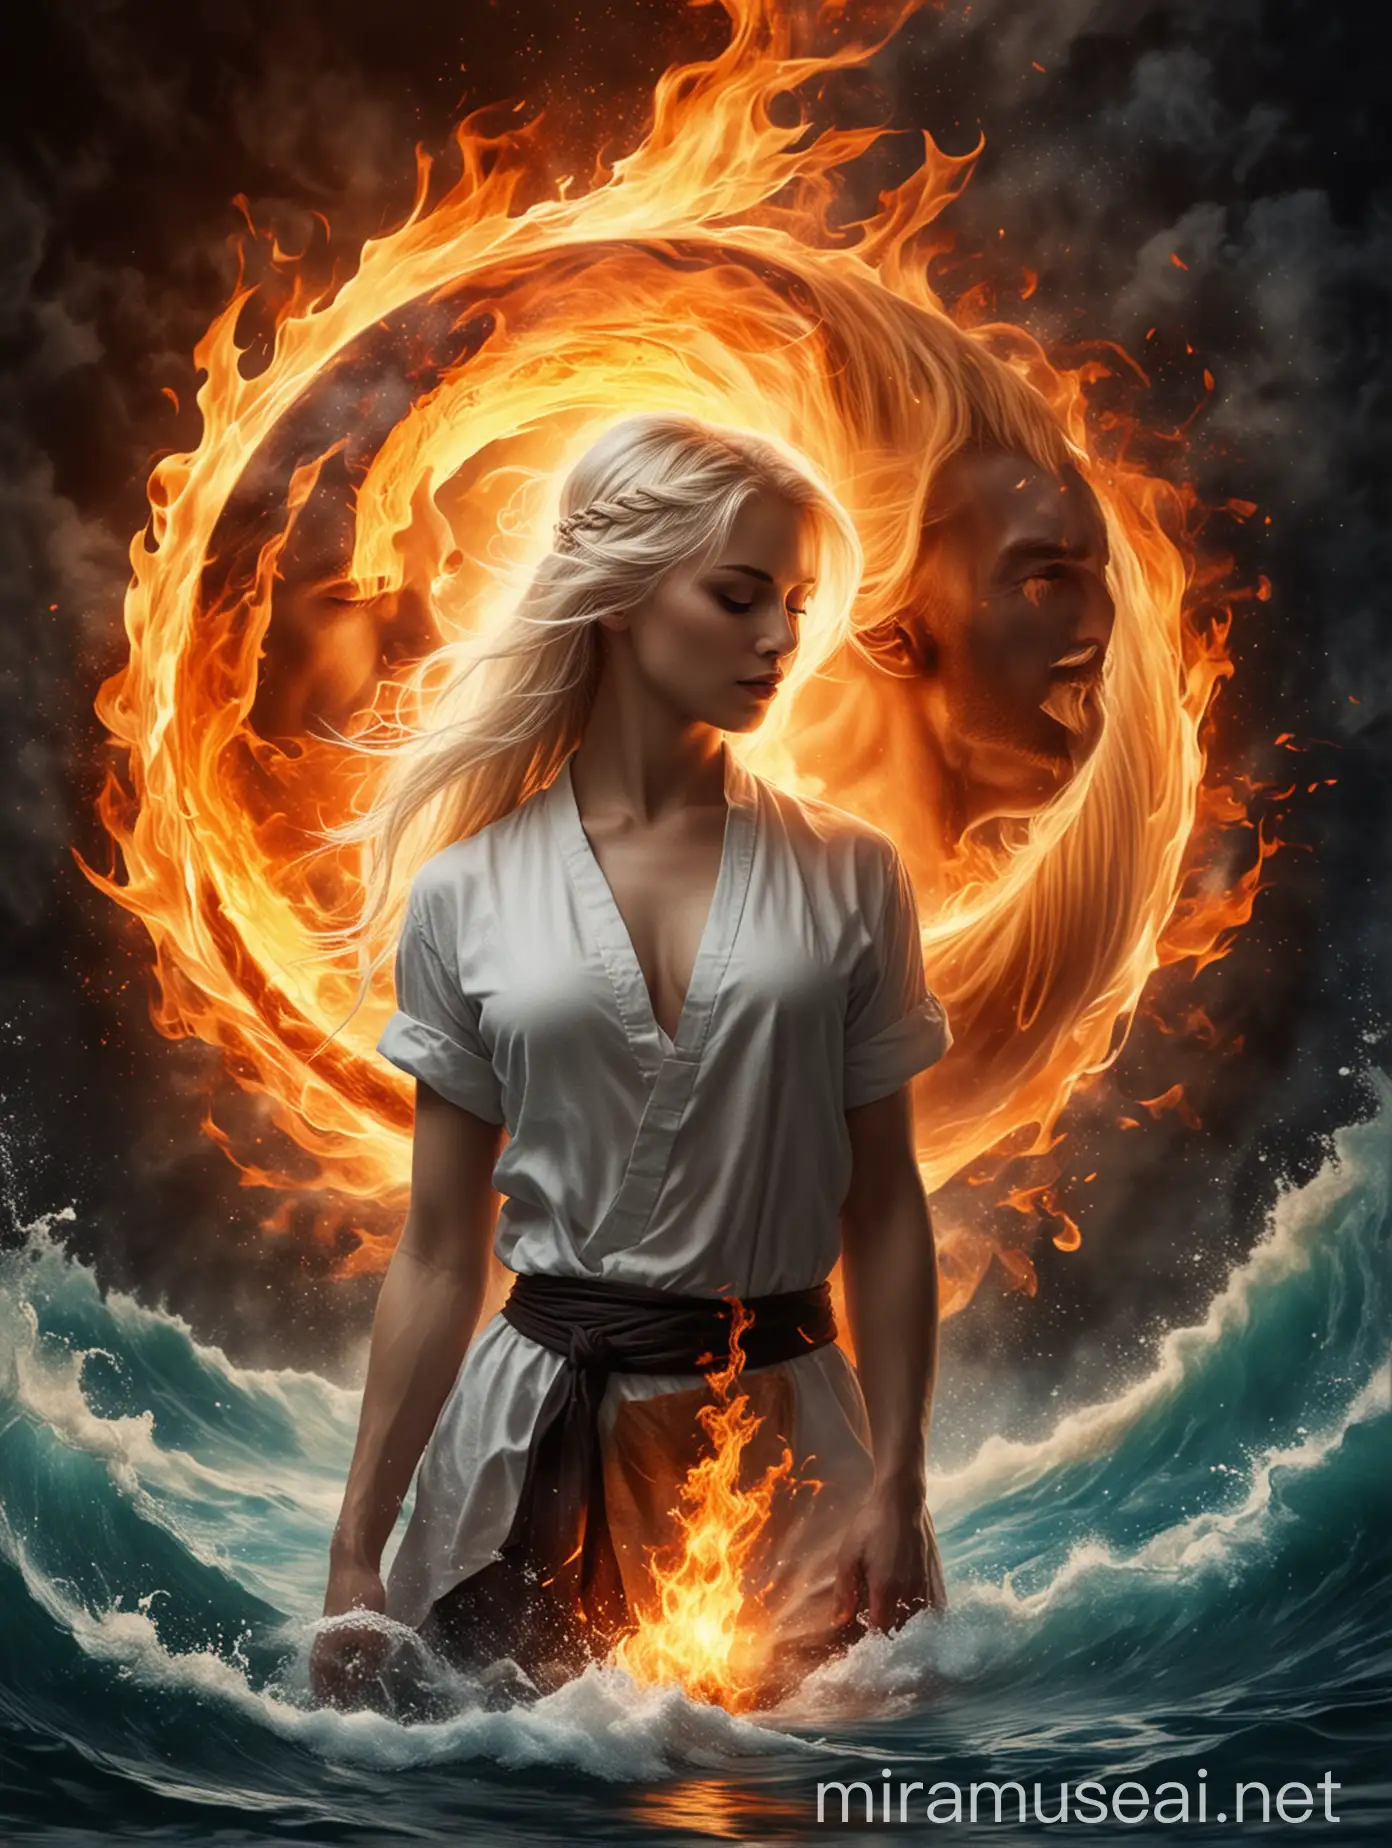 A strong, handsome, courageous man and a very beautiful girl, a blonde against the background of Yin Yang, fire, and water